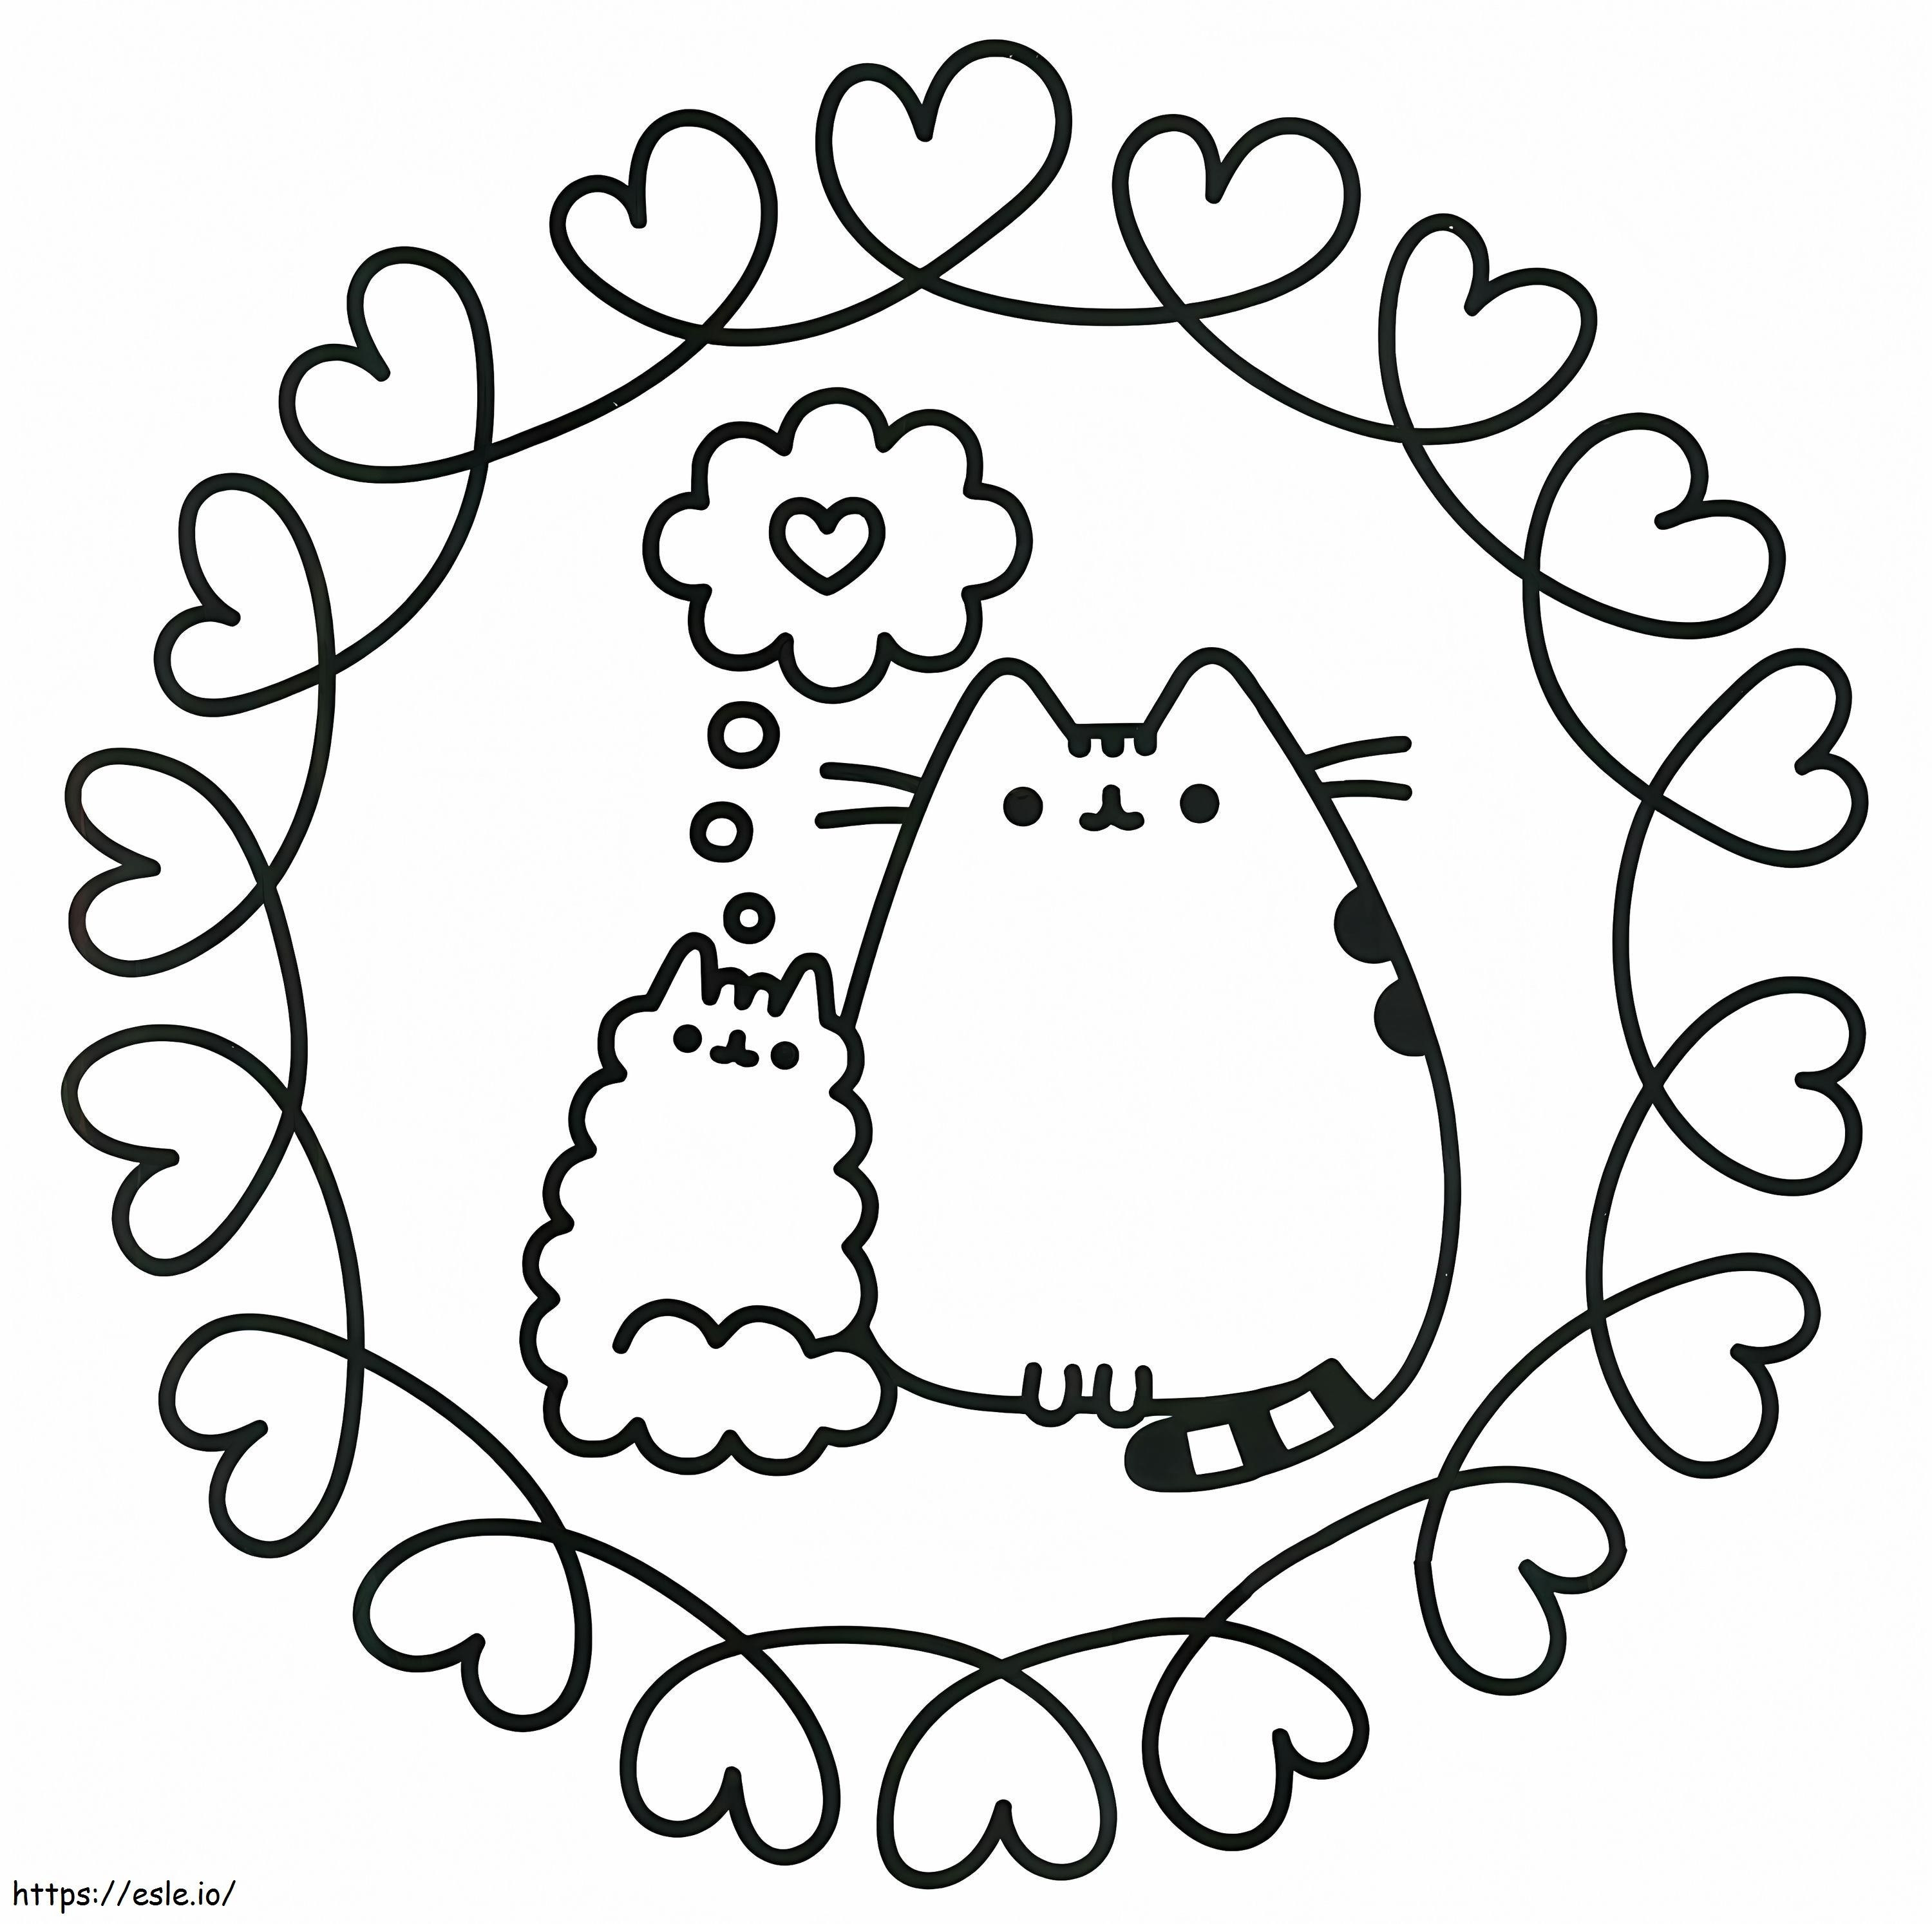 Pusheen In Love coloring page